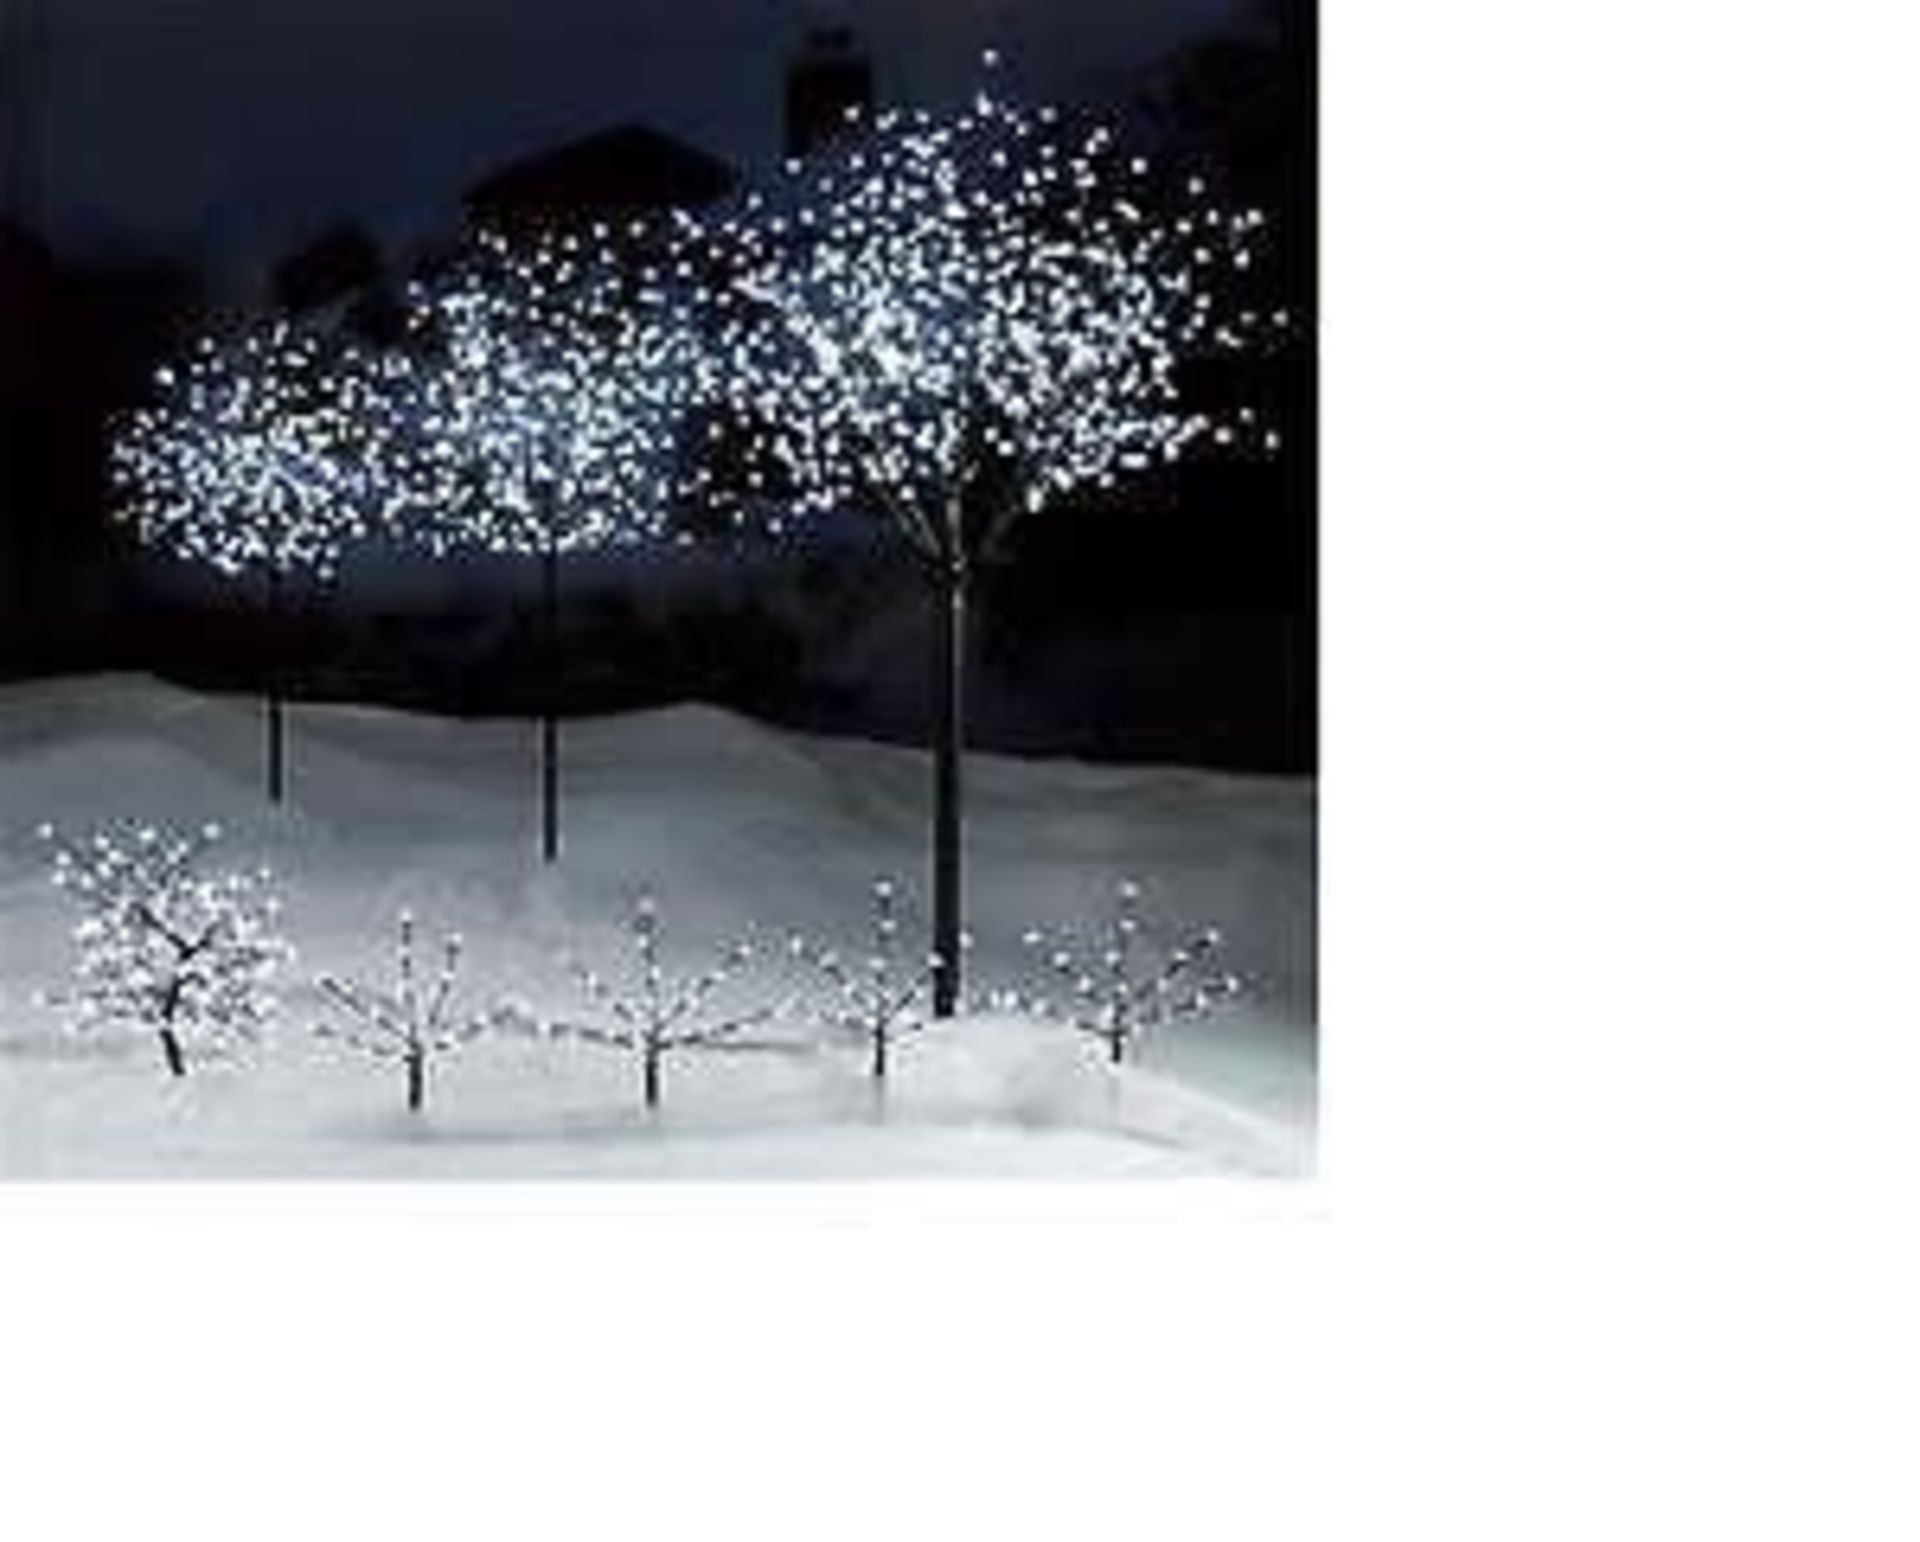 + VAT Brand New 150cm Snow White LED Blossom Tree For Indoor And Outdoor Use RRP £54.99 - Image 2 of 2